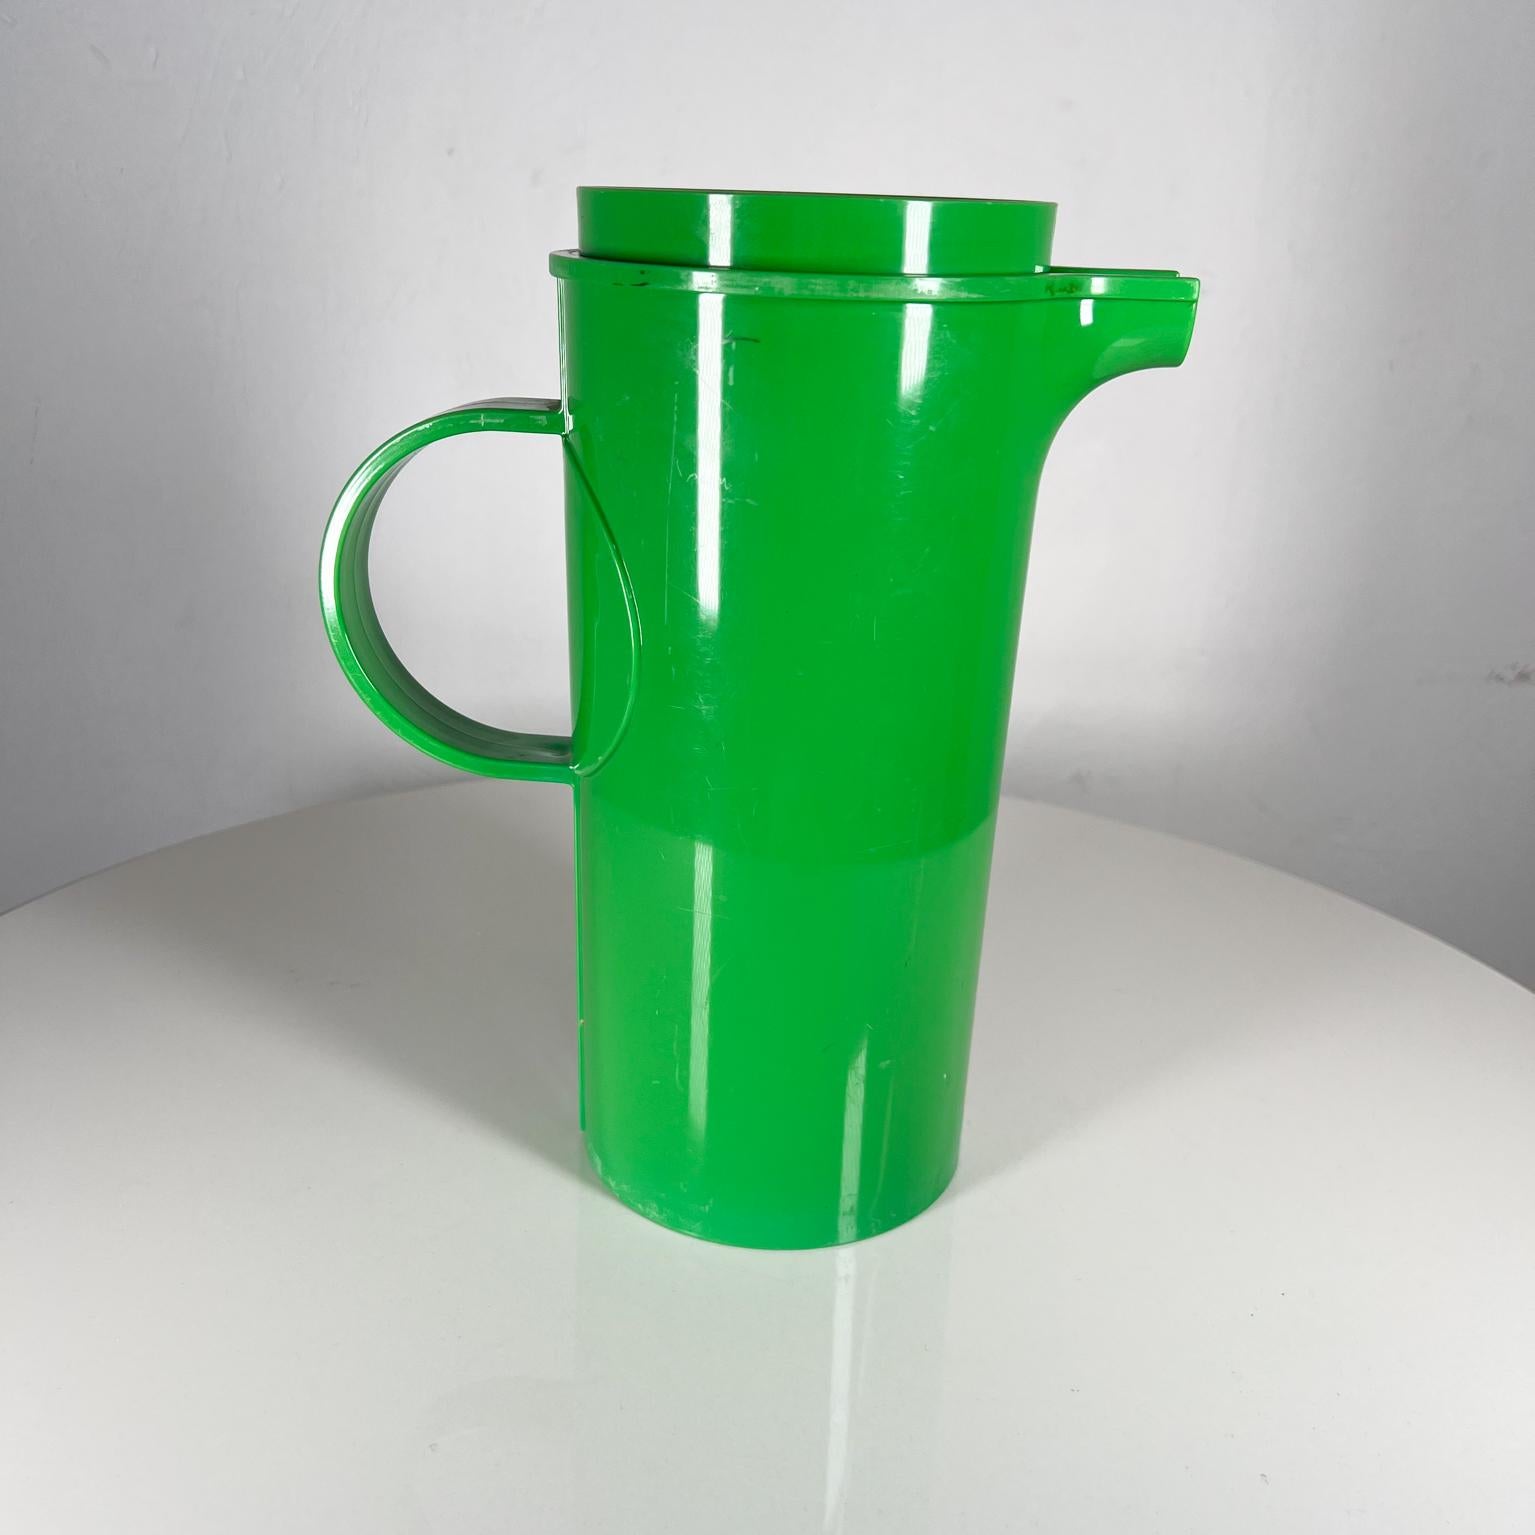 1960s green pitcher Modern Dansk designs plastic barware
Ideal outdoor barware
10.13 tall x 8.38 d x 4.88 diameter
Unrestored preowned vintage condition, refer to all images.
 